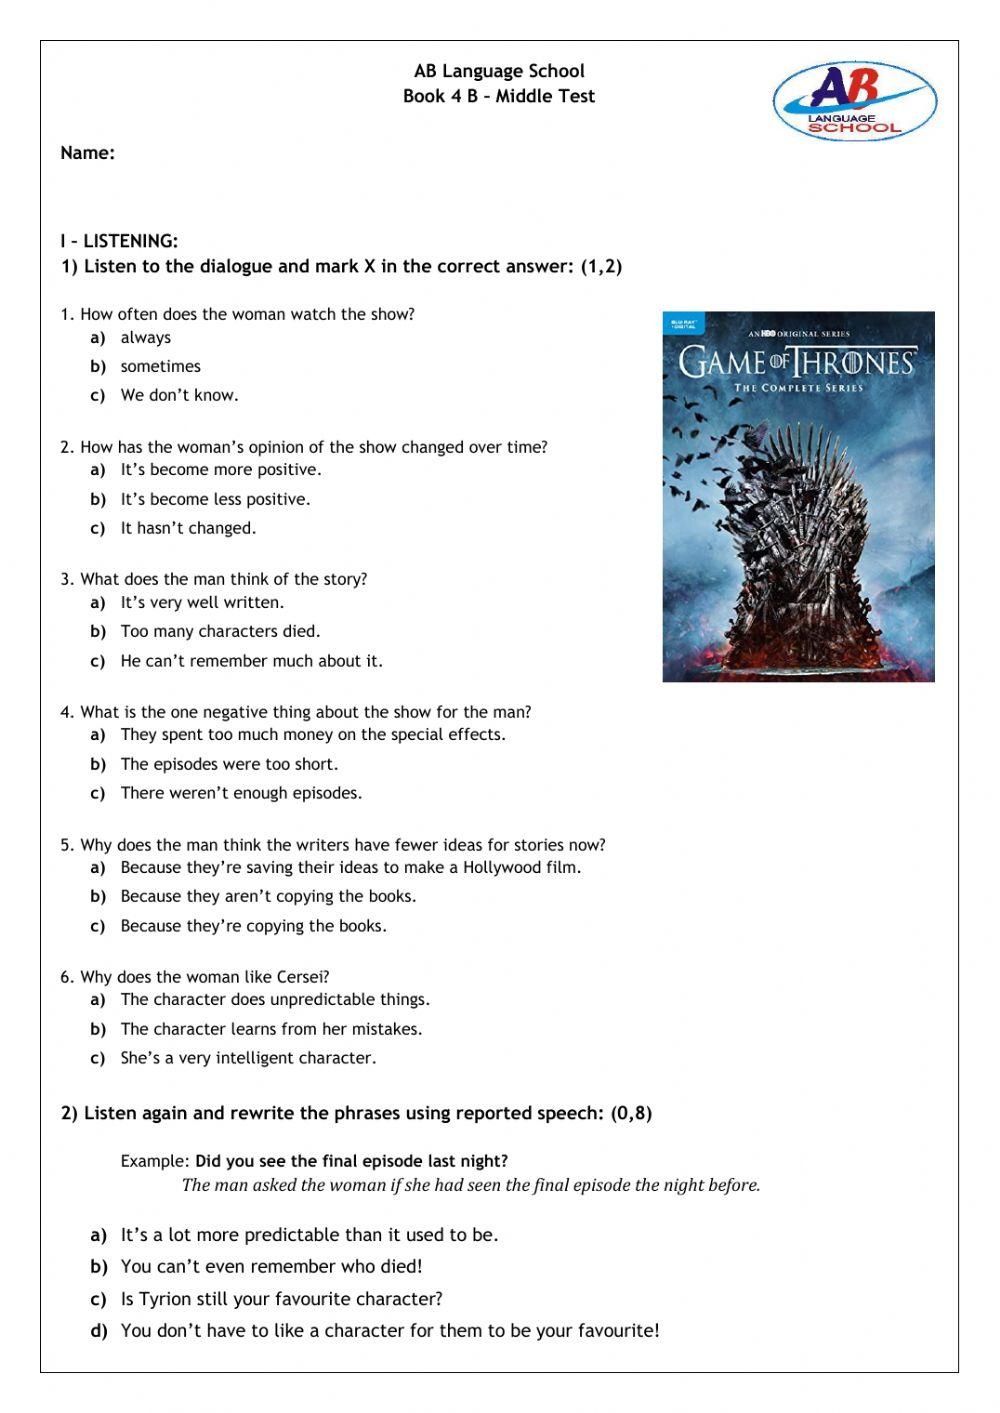 Middle test Book 4 B